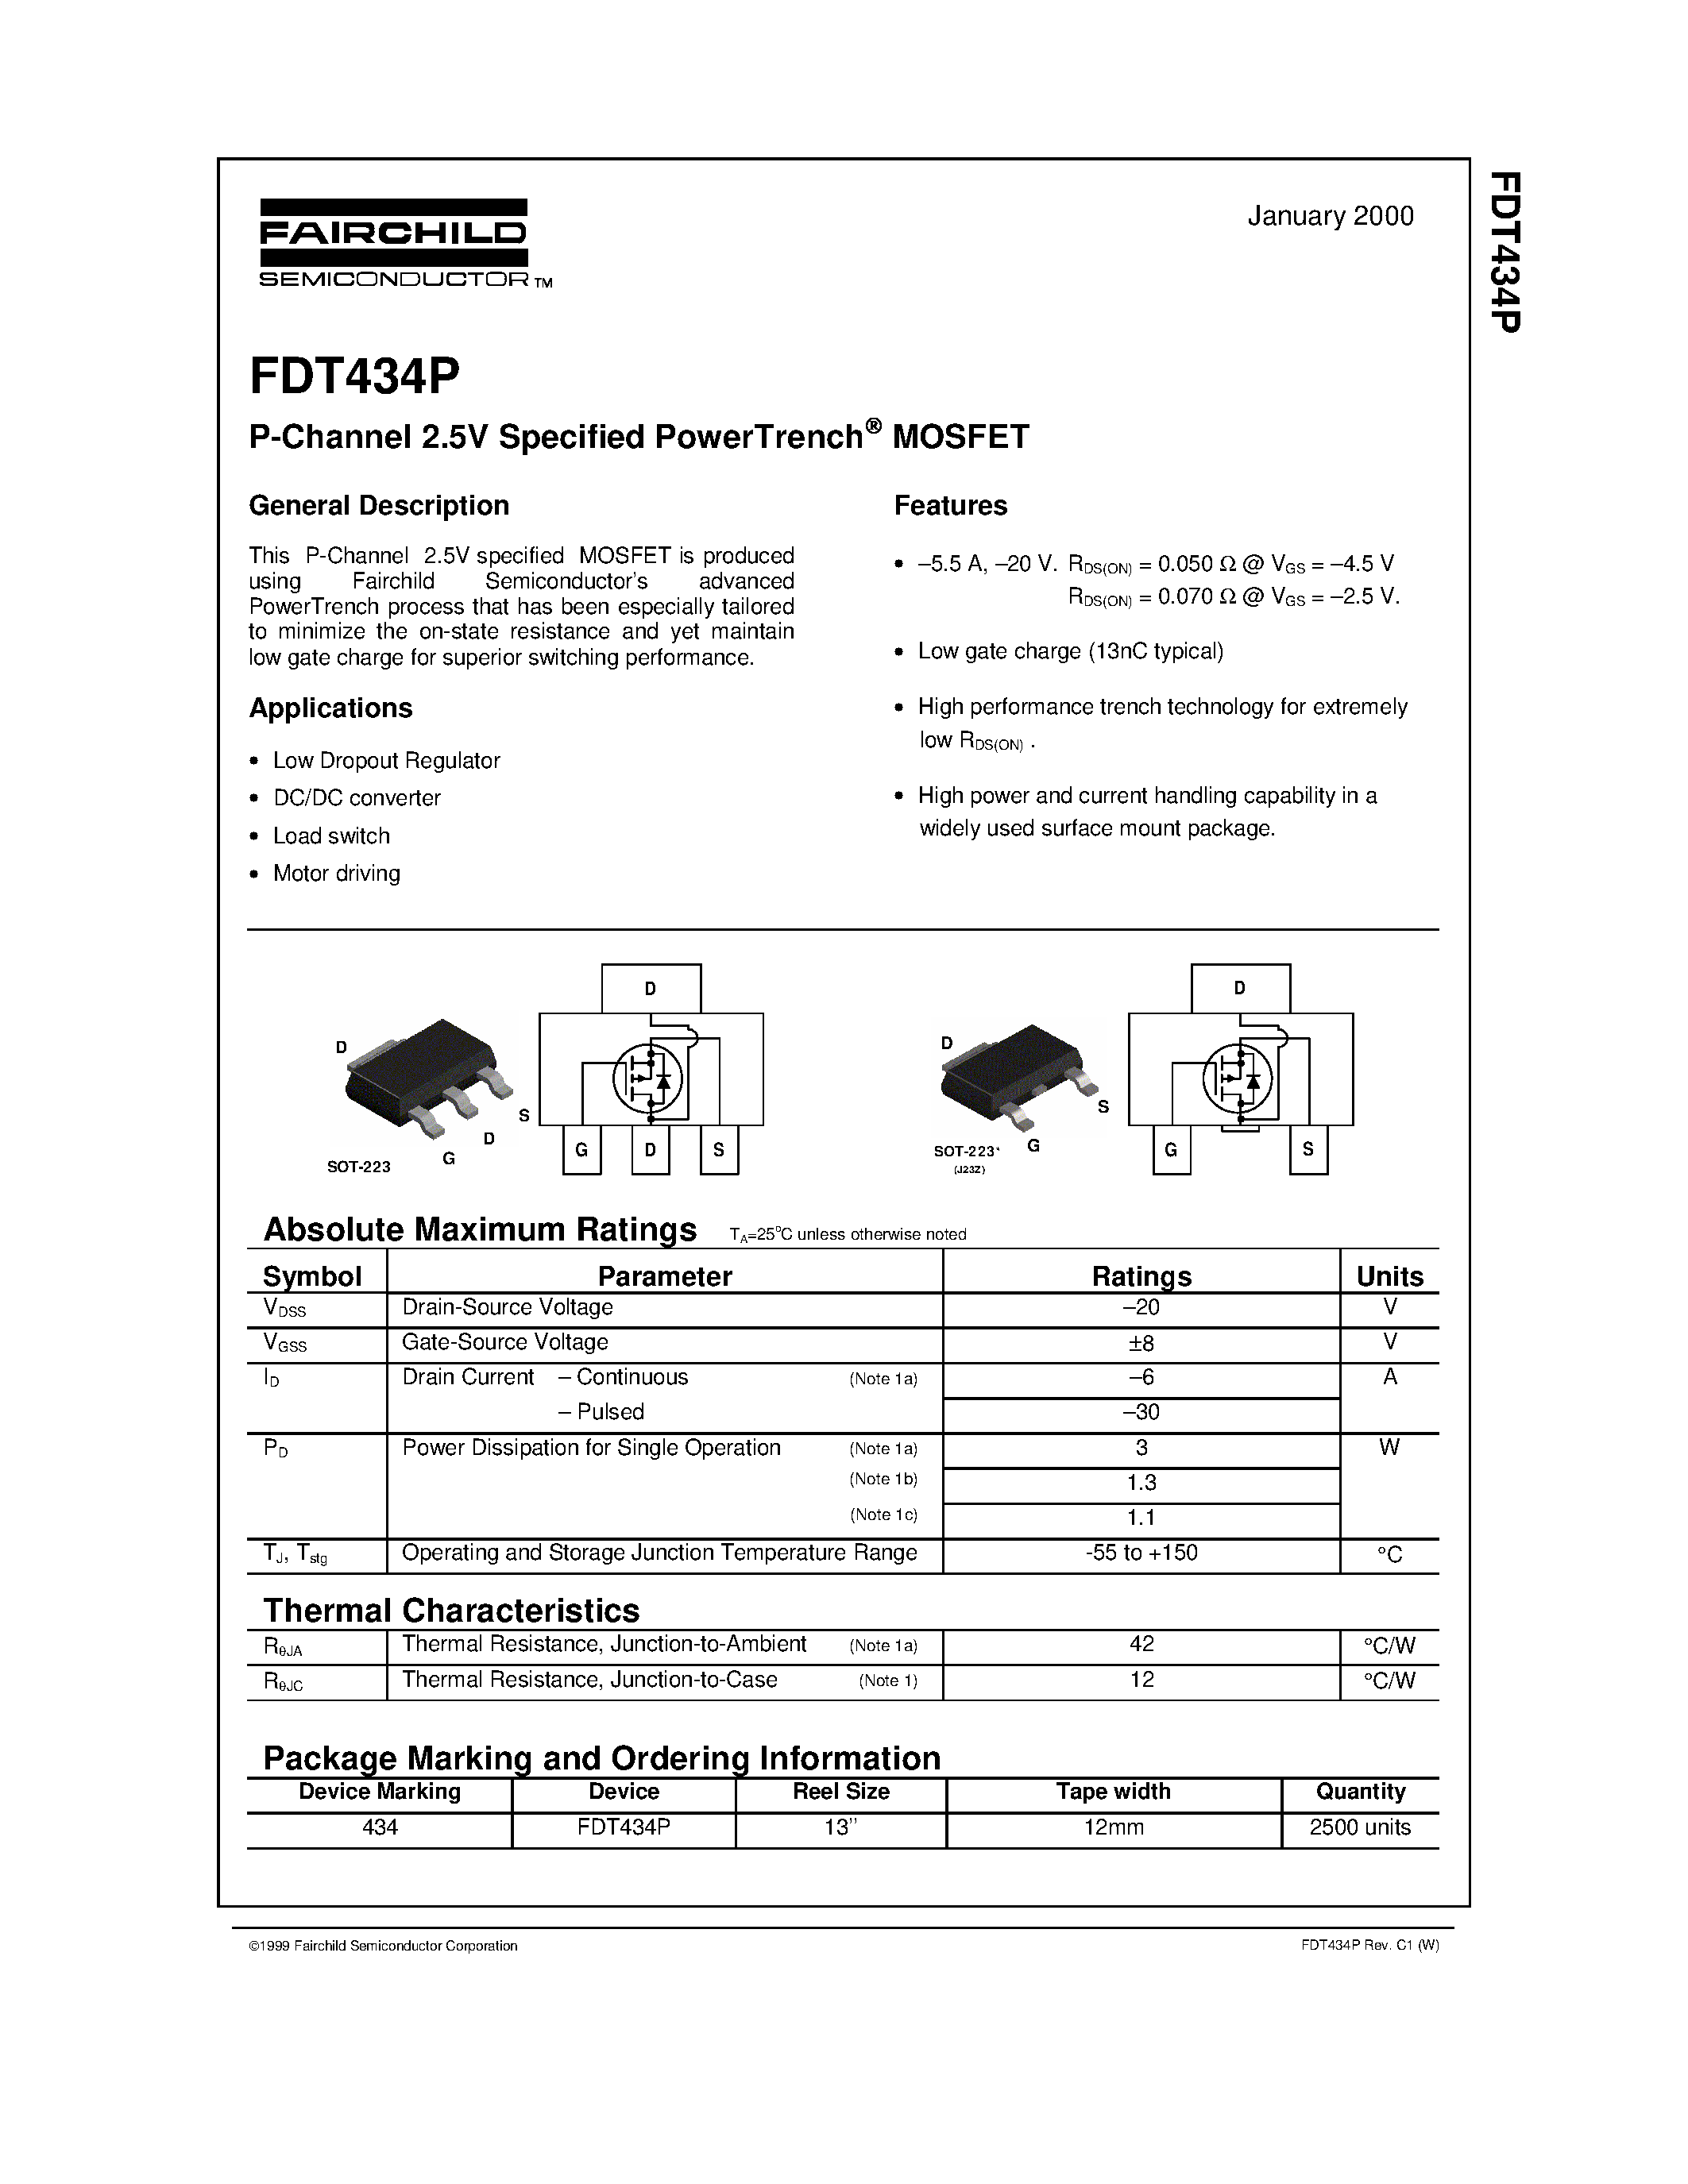 Datasheet FDT434 - P-Channel 2.5V Specified PowerTrench MOSFET page 1